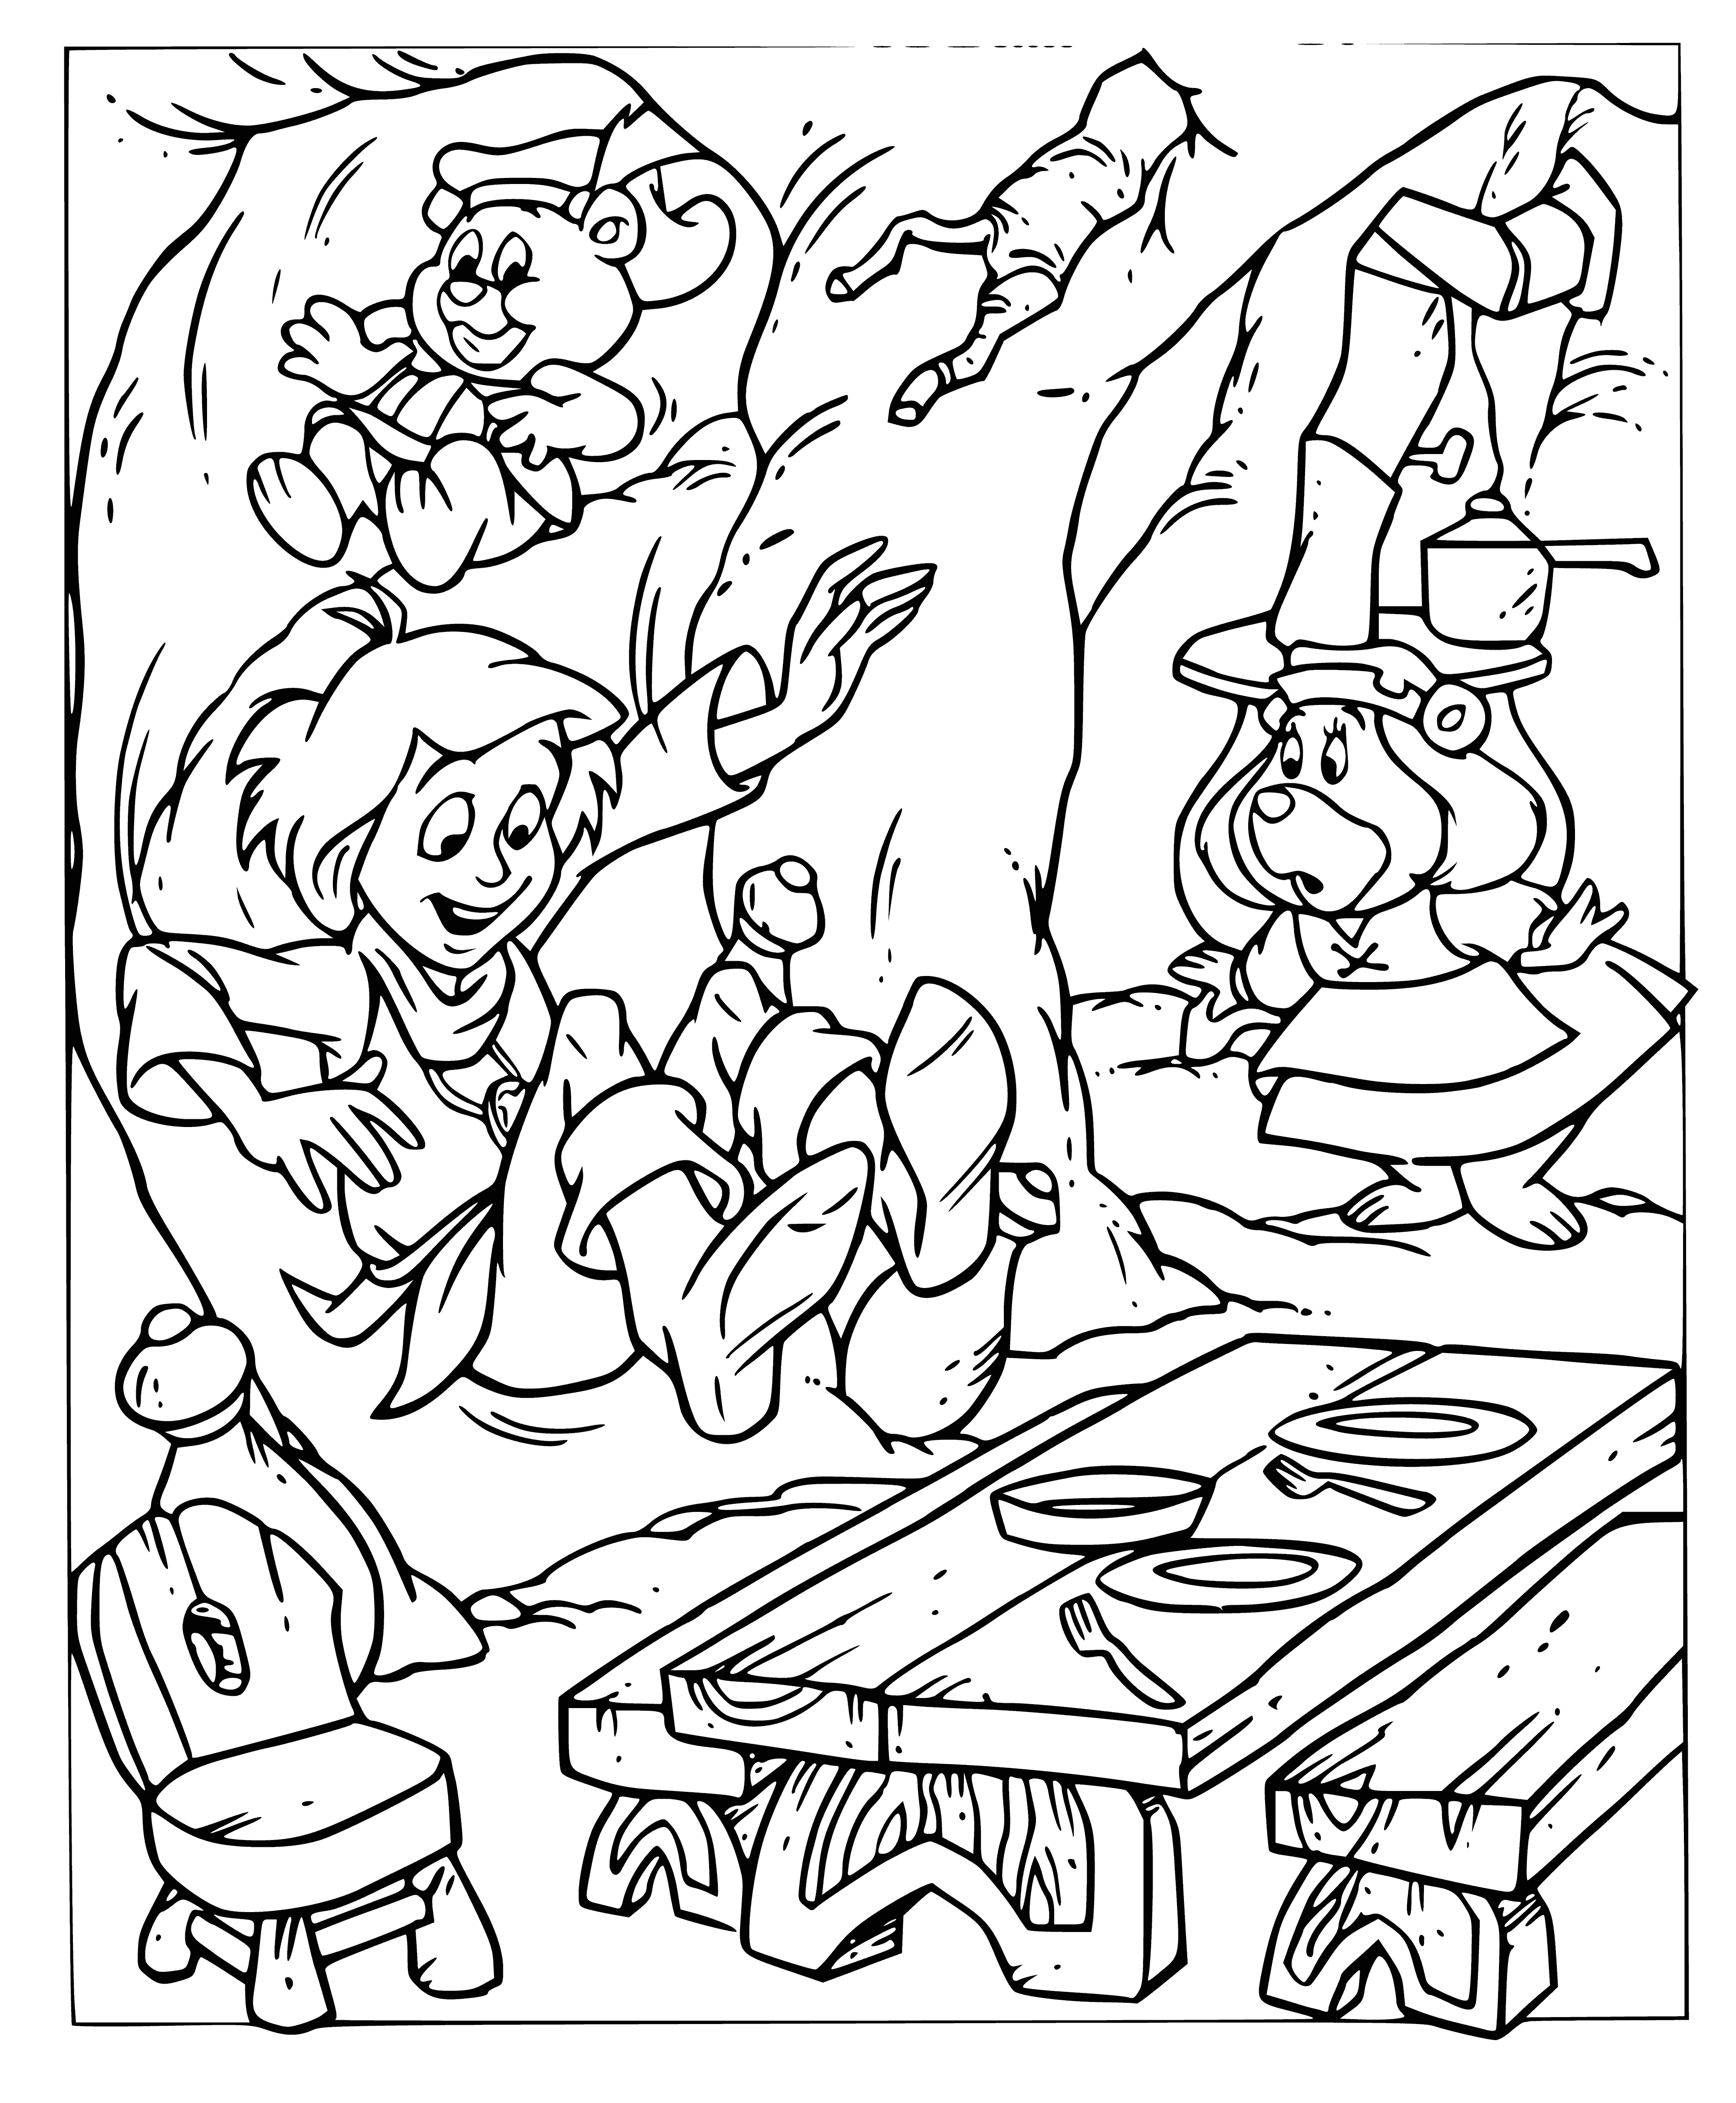 Gummy Bears coloring page